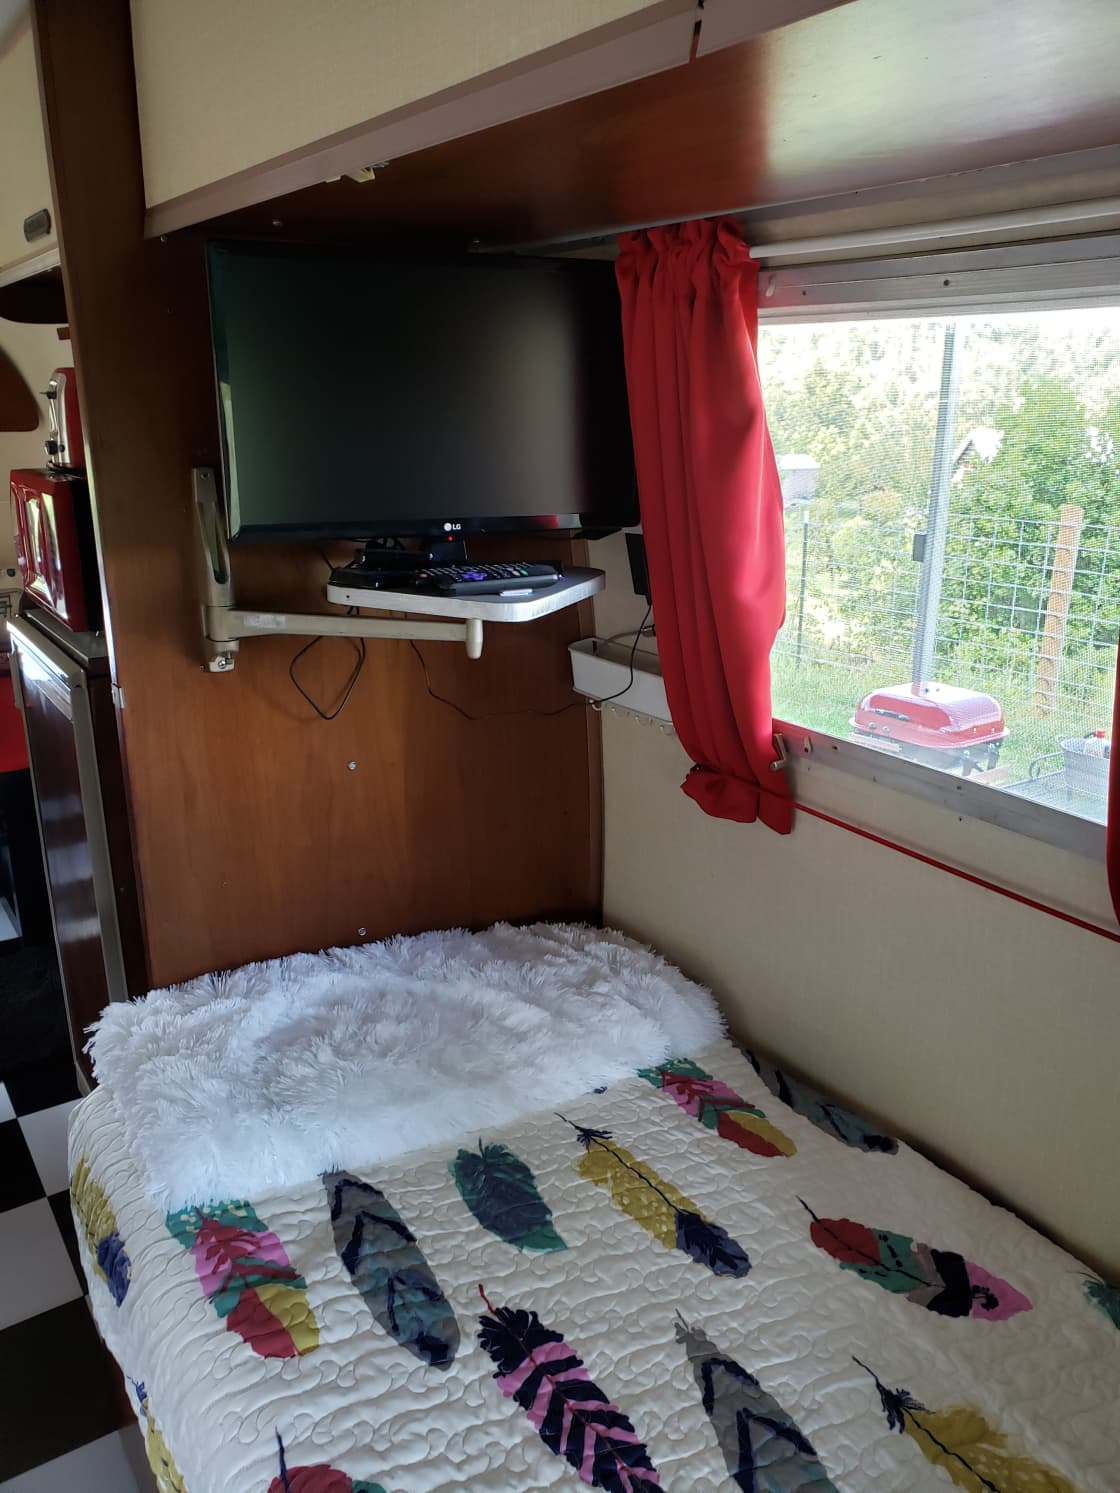 22" TV with dedicated WIFI, ROKU streaming stick, NETFLIX, PRIME video, PBS, acorn and Britbox included.  TV on swing arm can be viewed from just about anywhere inside the Airstream.